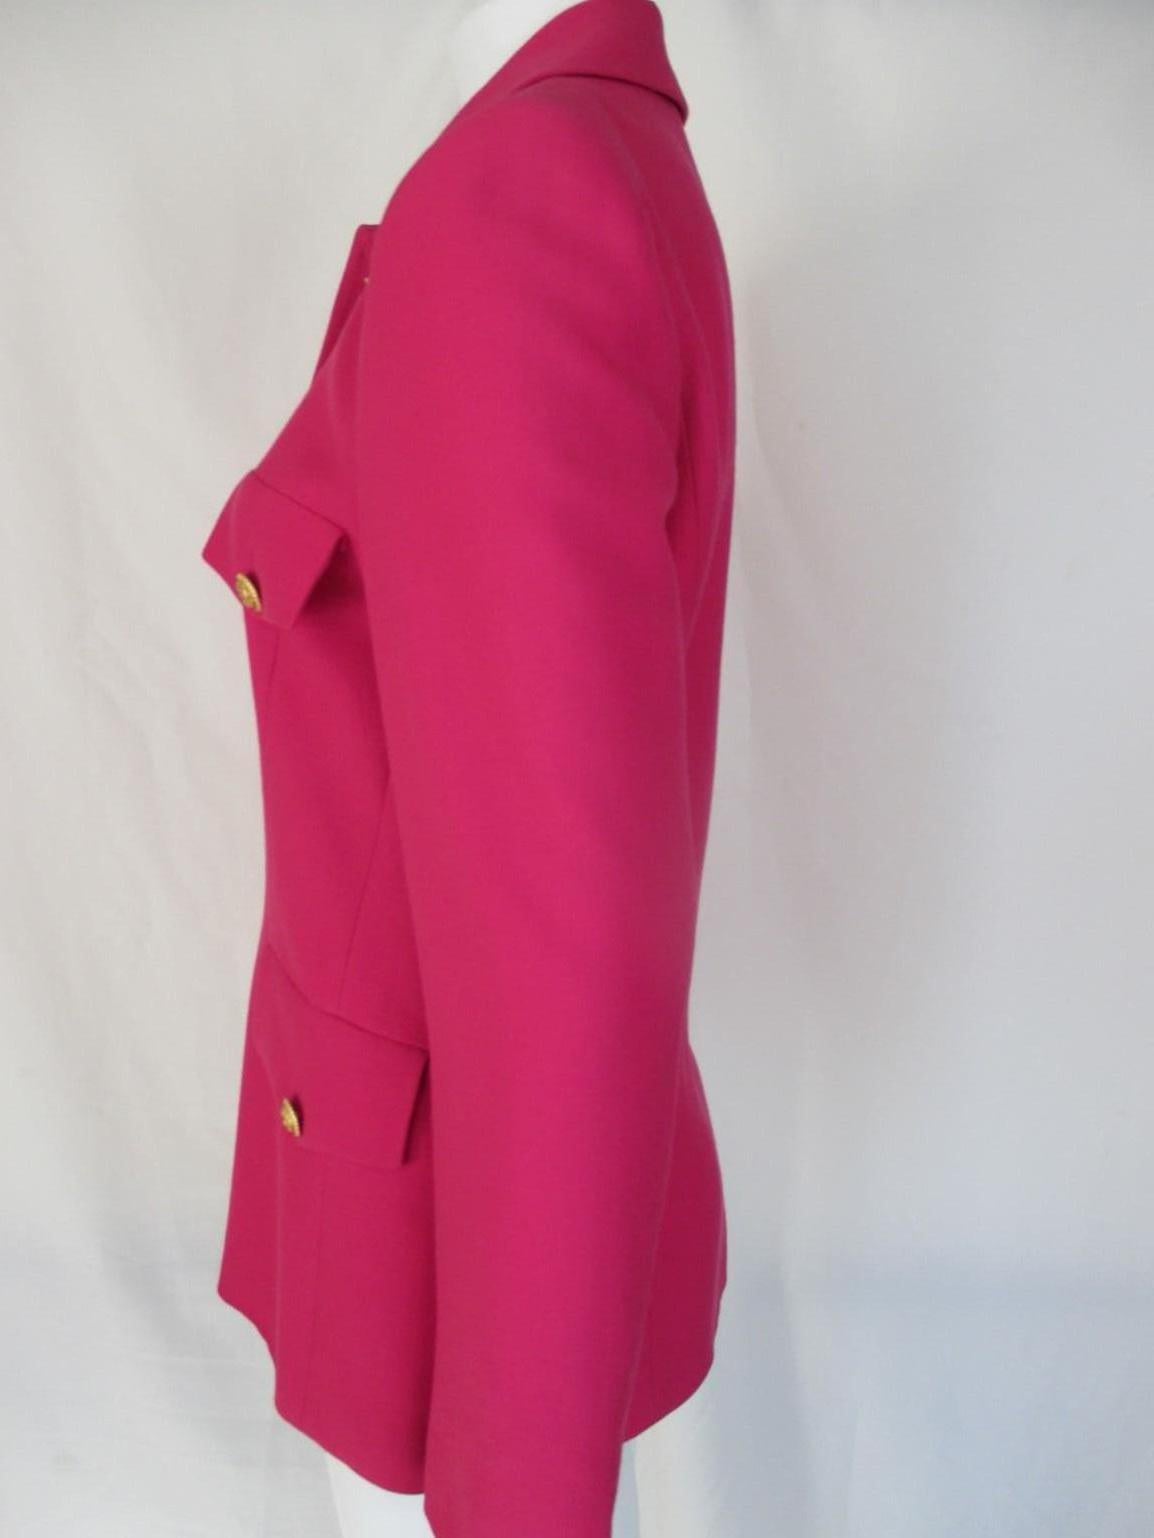 This extraordinaire pink blazer is made of light wool with sculpted gold colored buttons.
Louis Feraud label is out, but the LF lining is there.
Good preloved condition
Size Appears to be US 6-8/ EU 36-38, please refer to the measurements in the